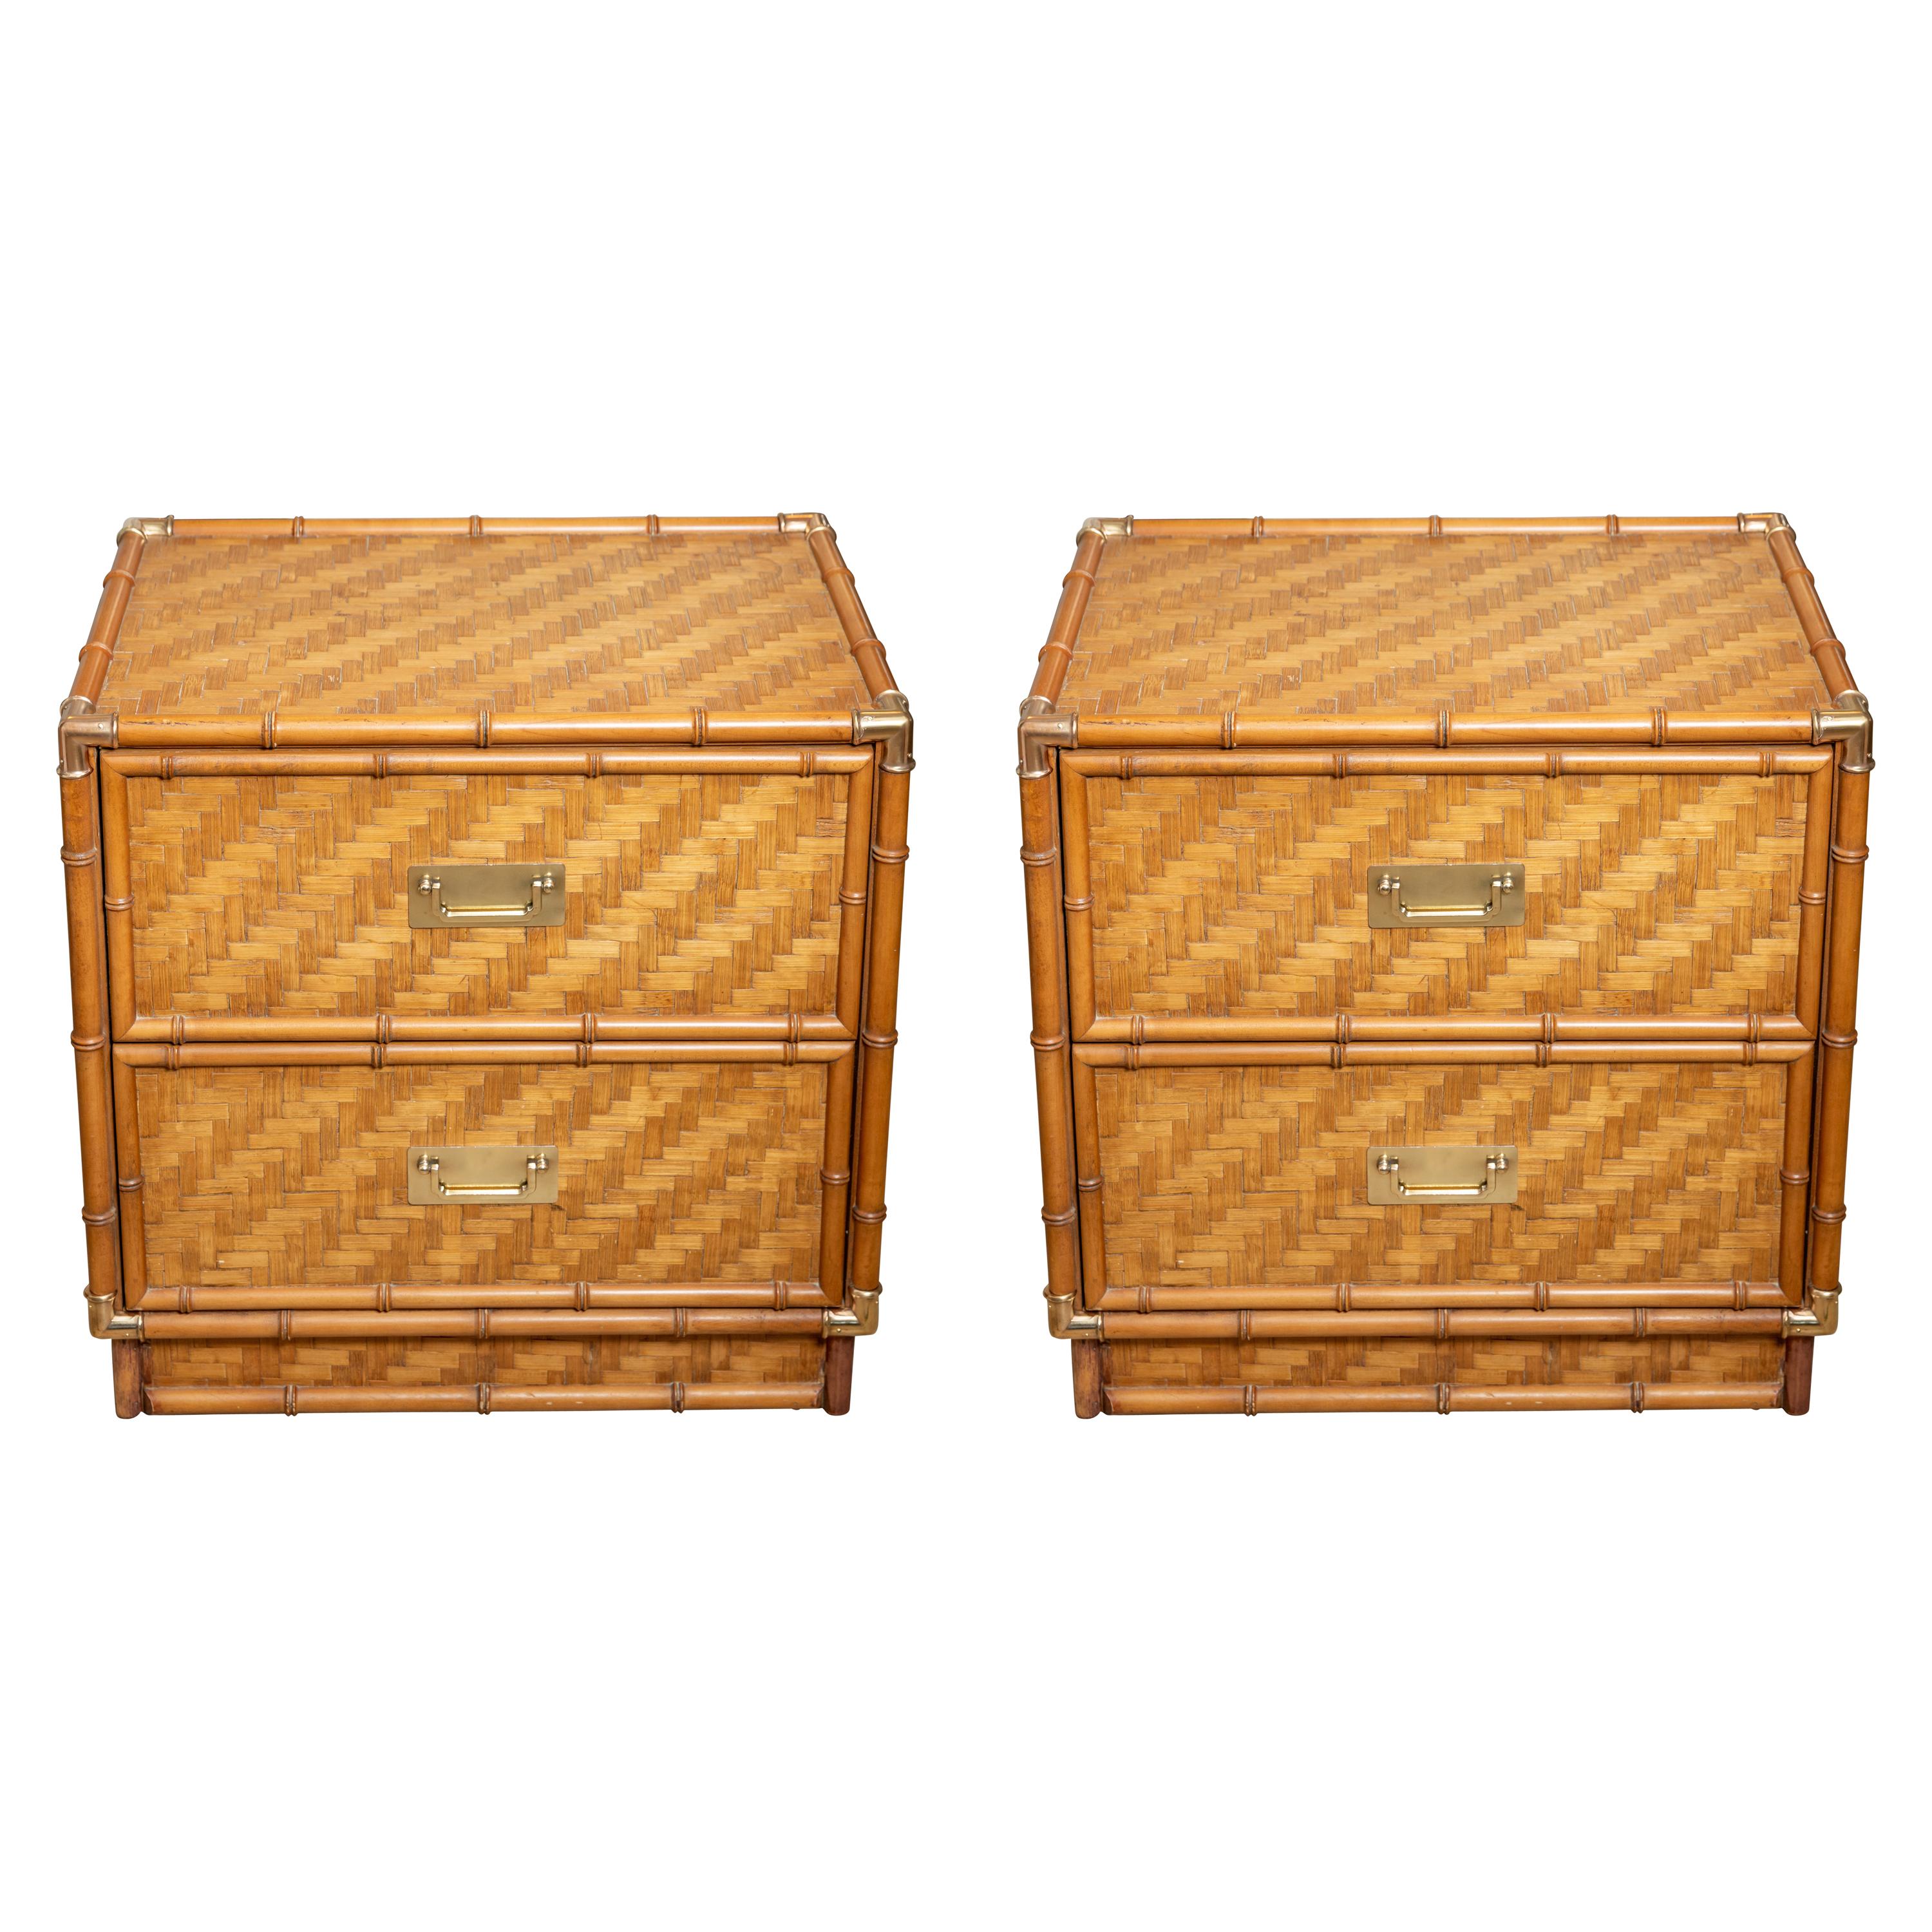 Pair of Faux Bamboo, Woven Rattan Two-Drawer Nightstands with Brass Details